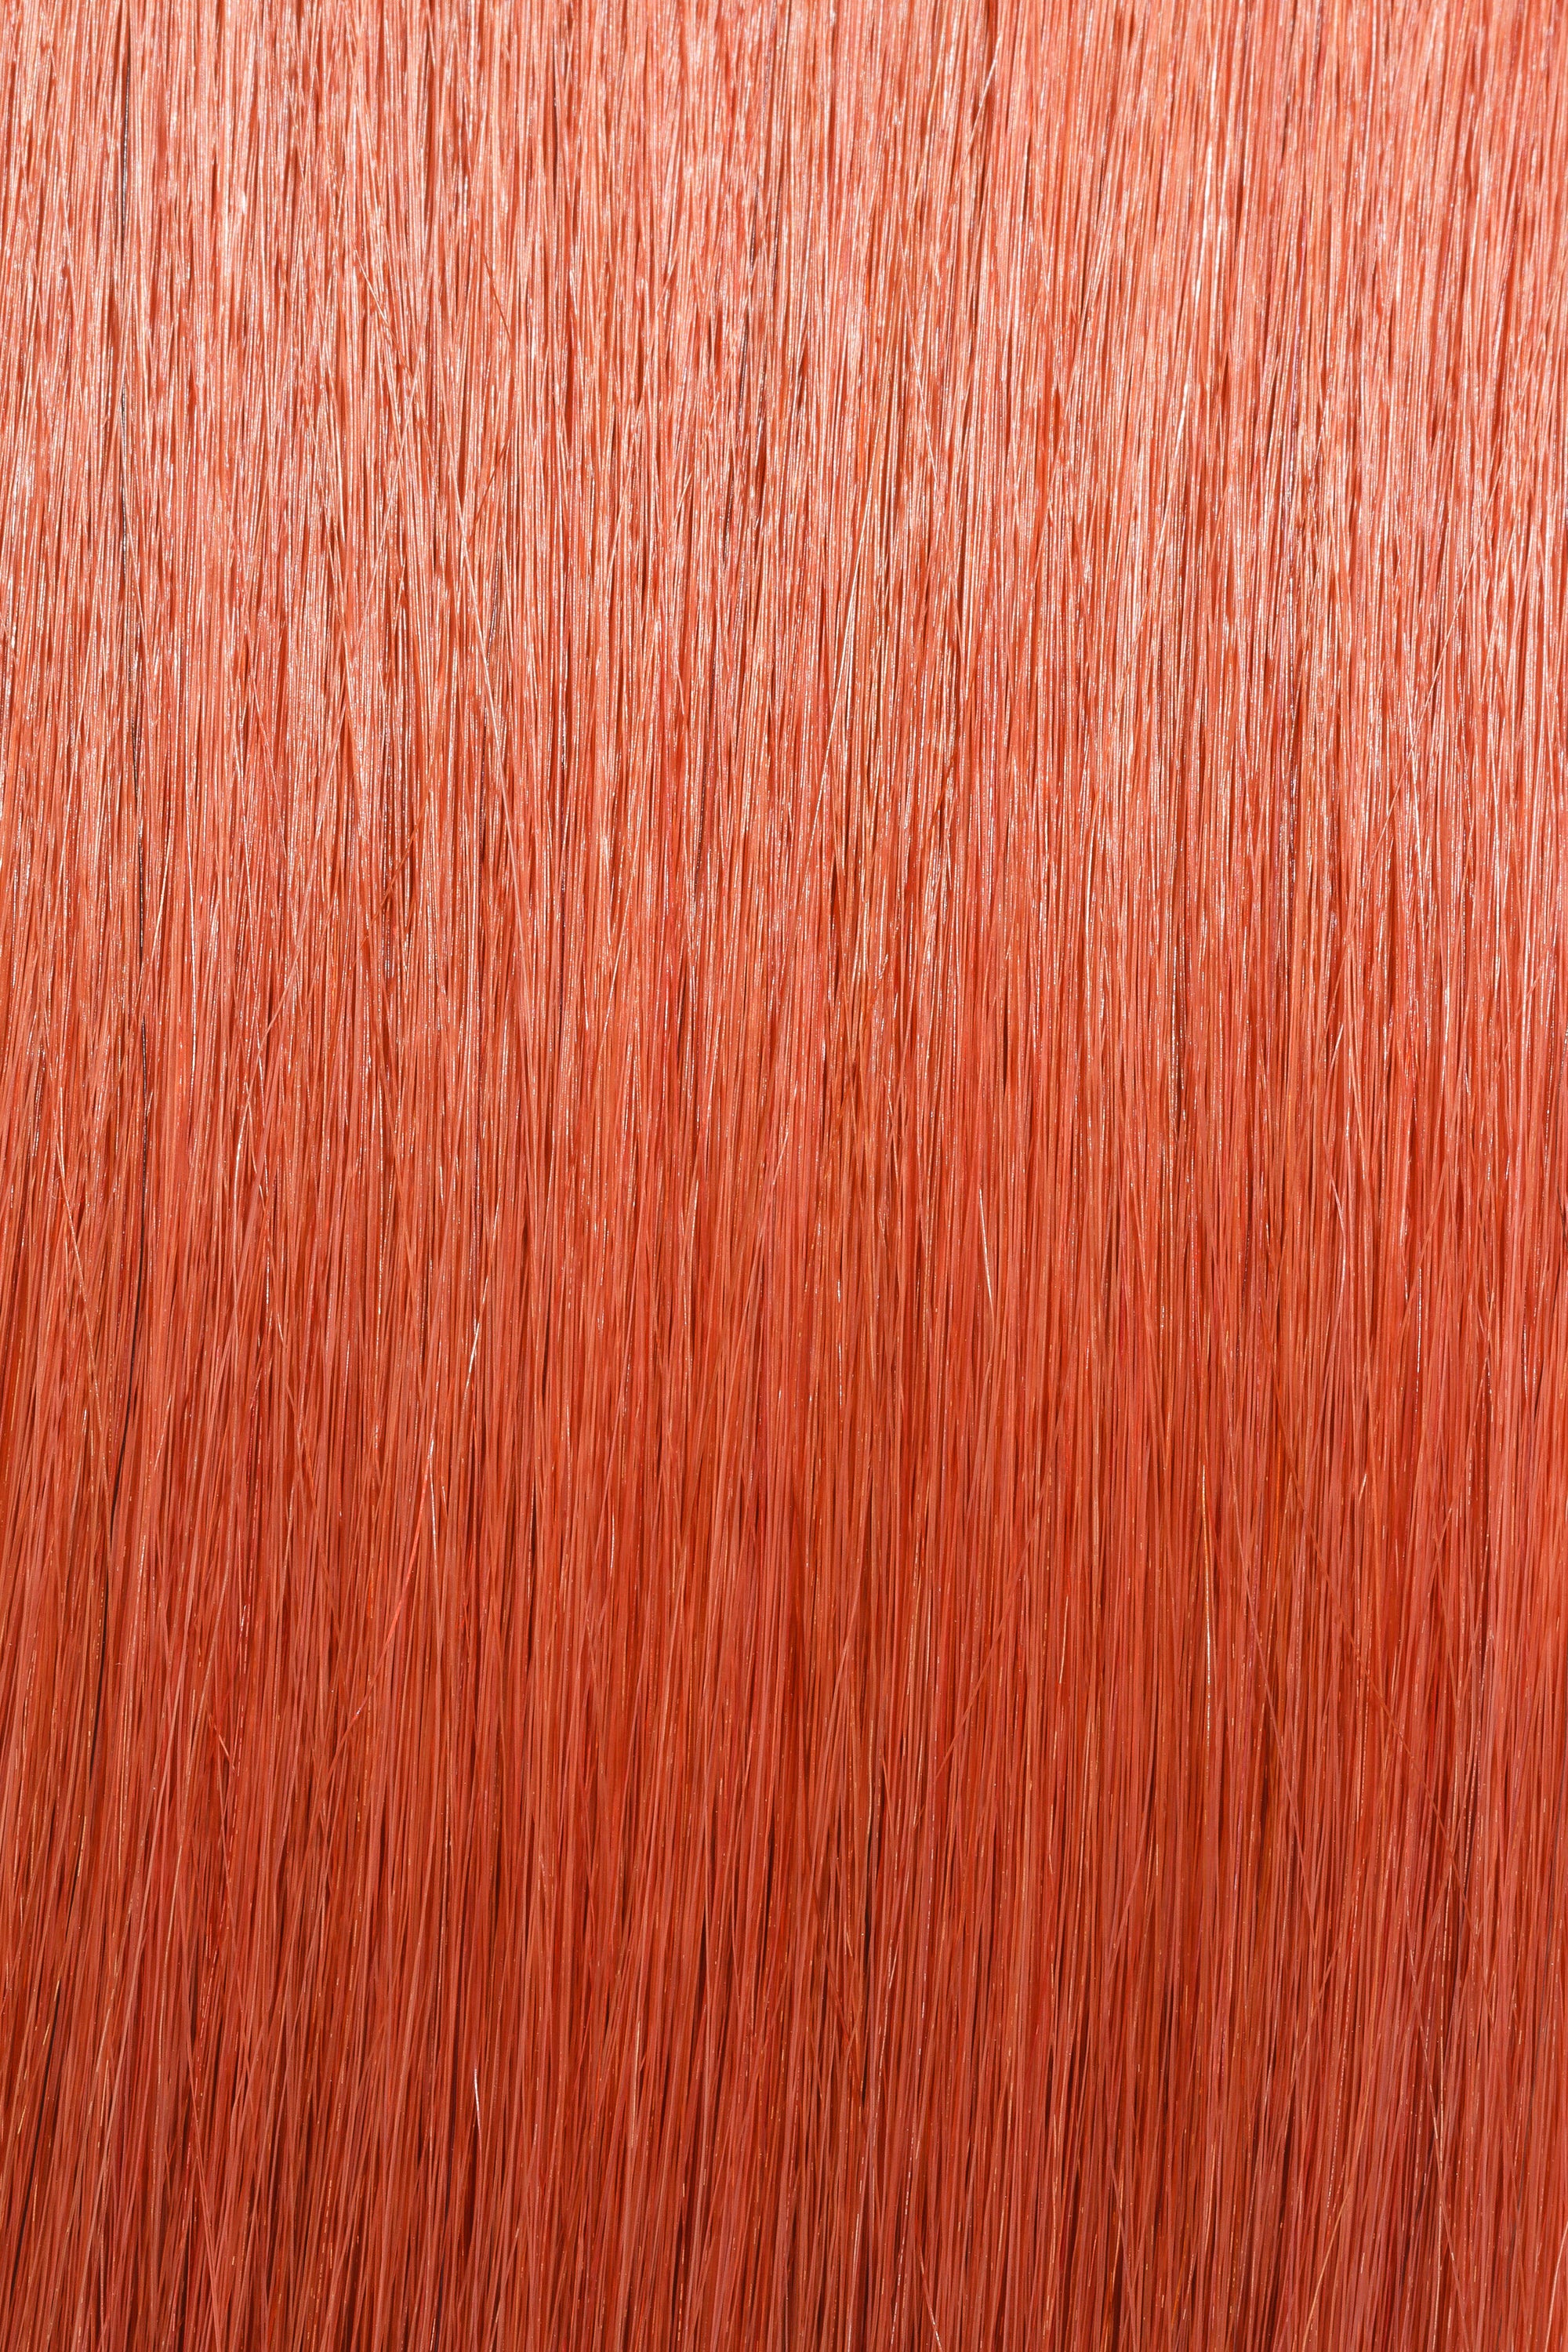 Vibrant Red Copper #130 - Single Pack